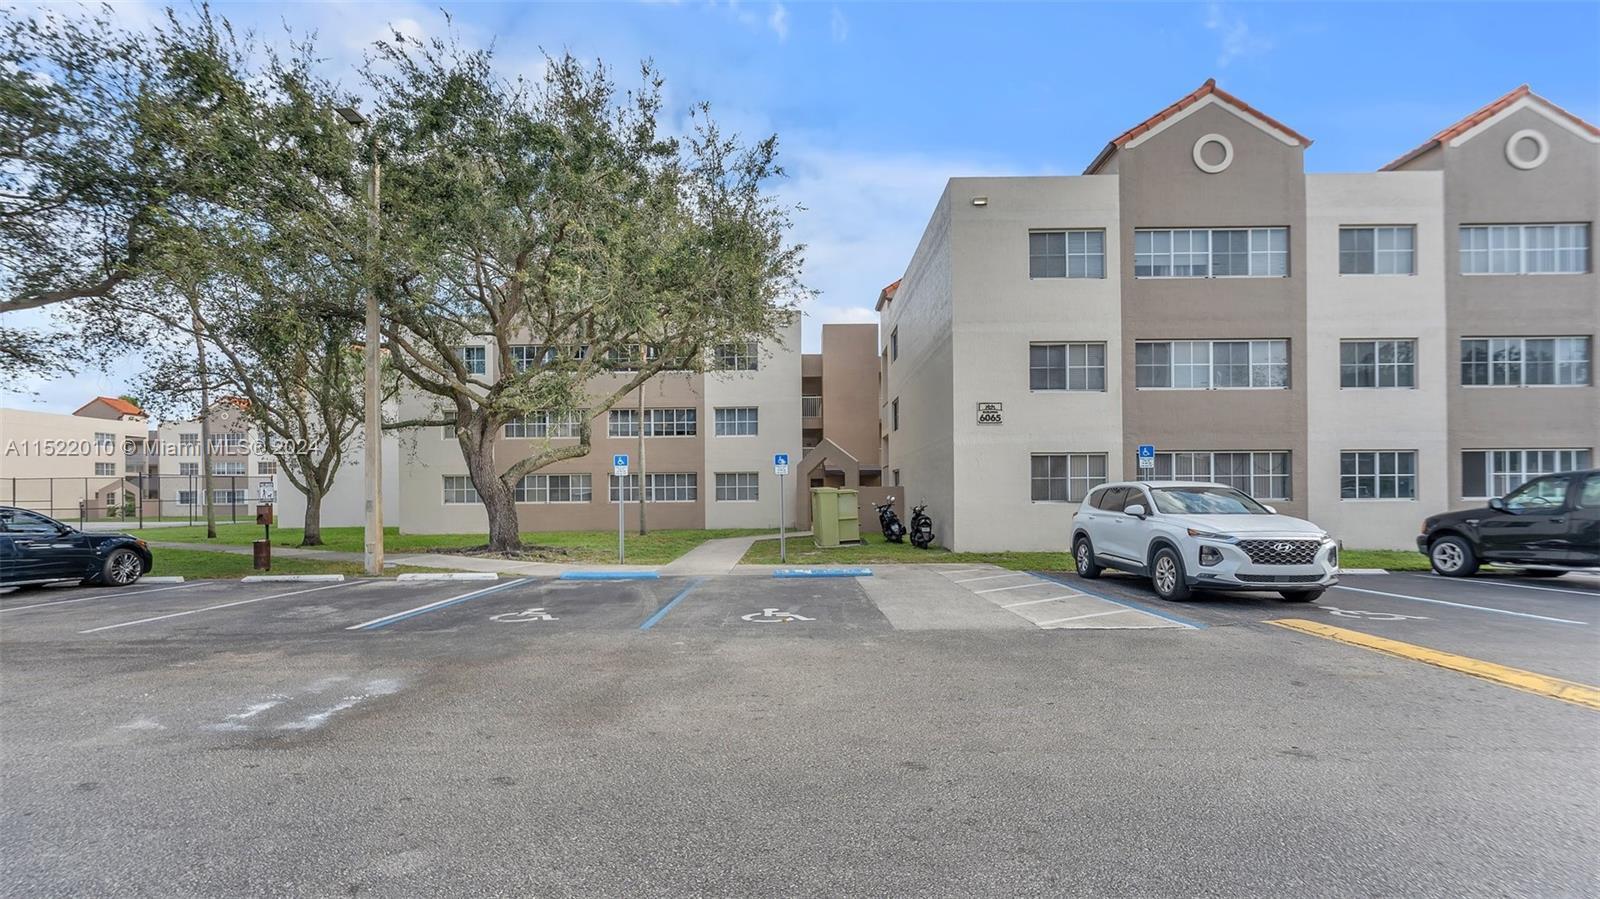 Photo of 6065 NW 186th St #302 in Hialeah, FL